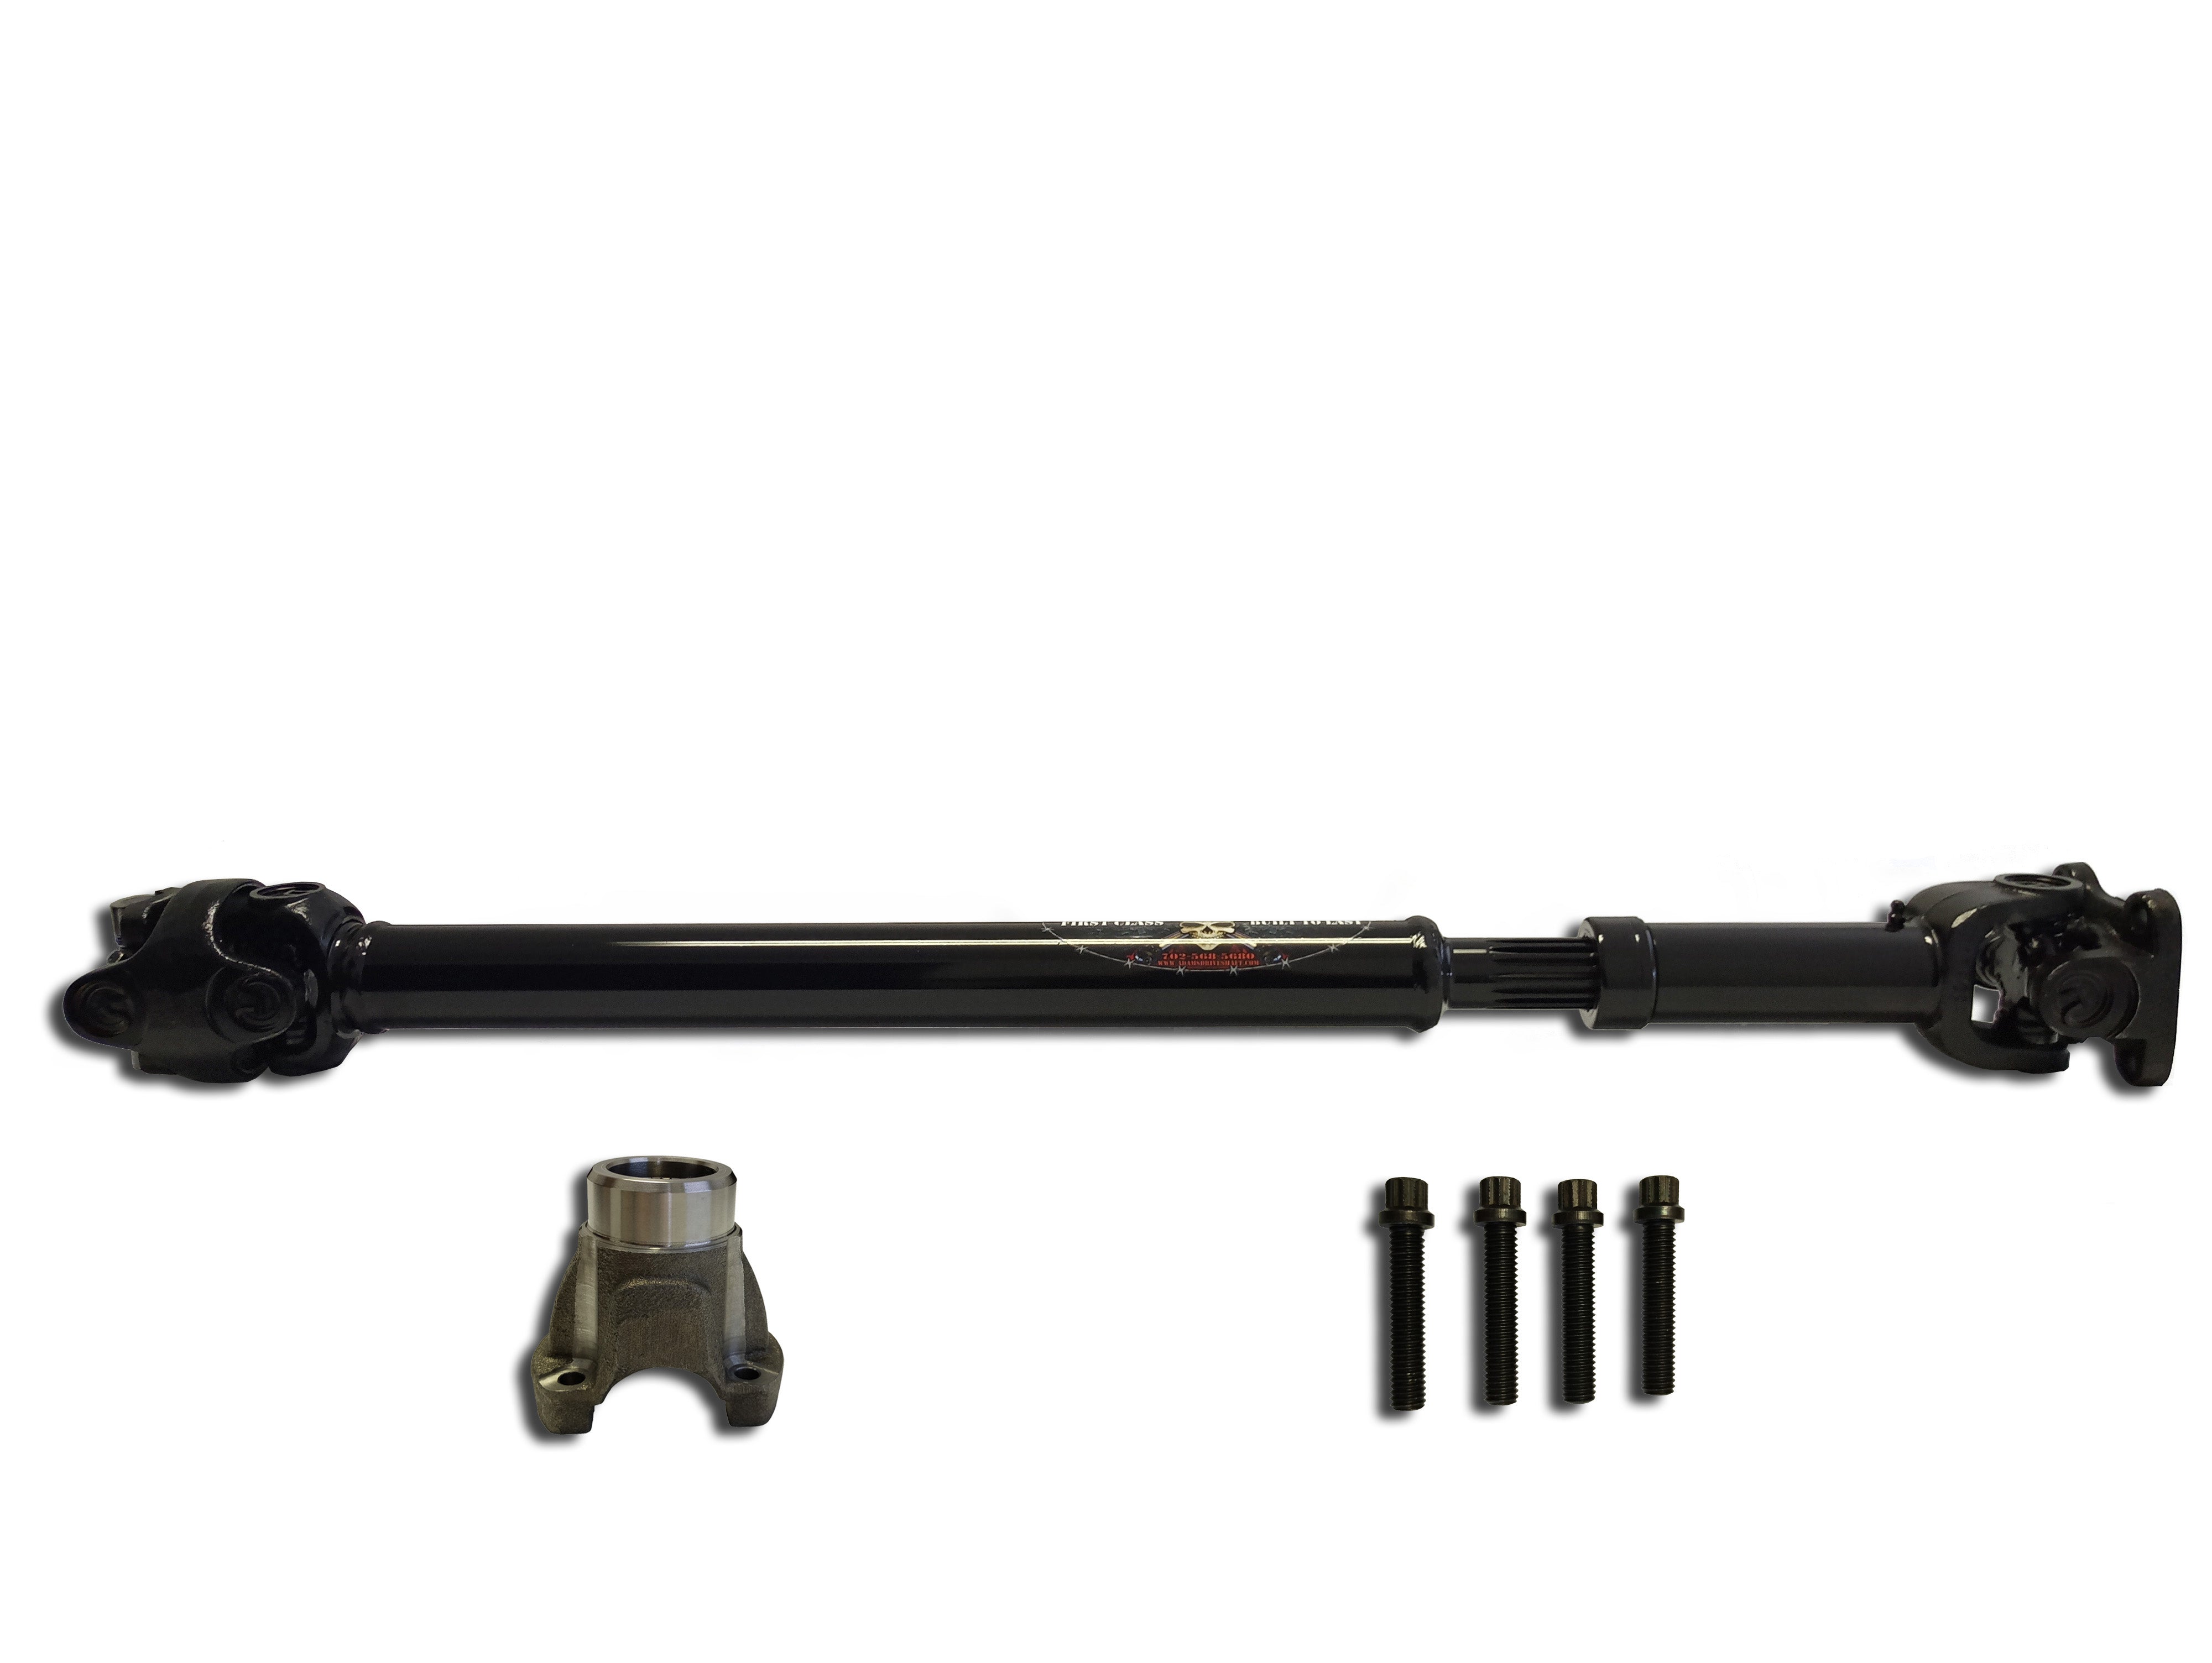 Adams Driveshaft JK Front 1310 CV Driveshaft with Spicer greasable u-joints [HEAVY DUTY SERIES]